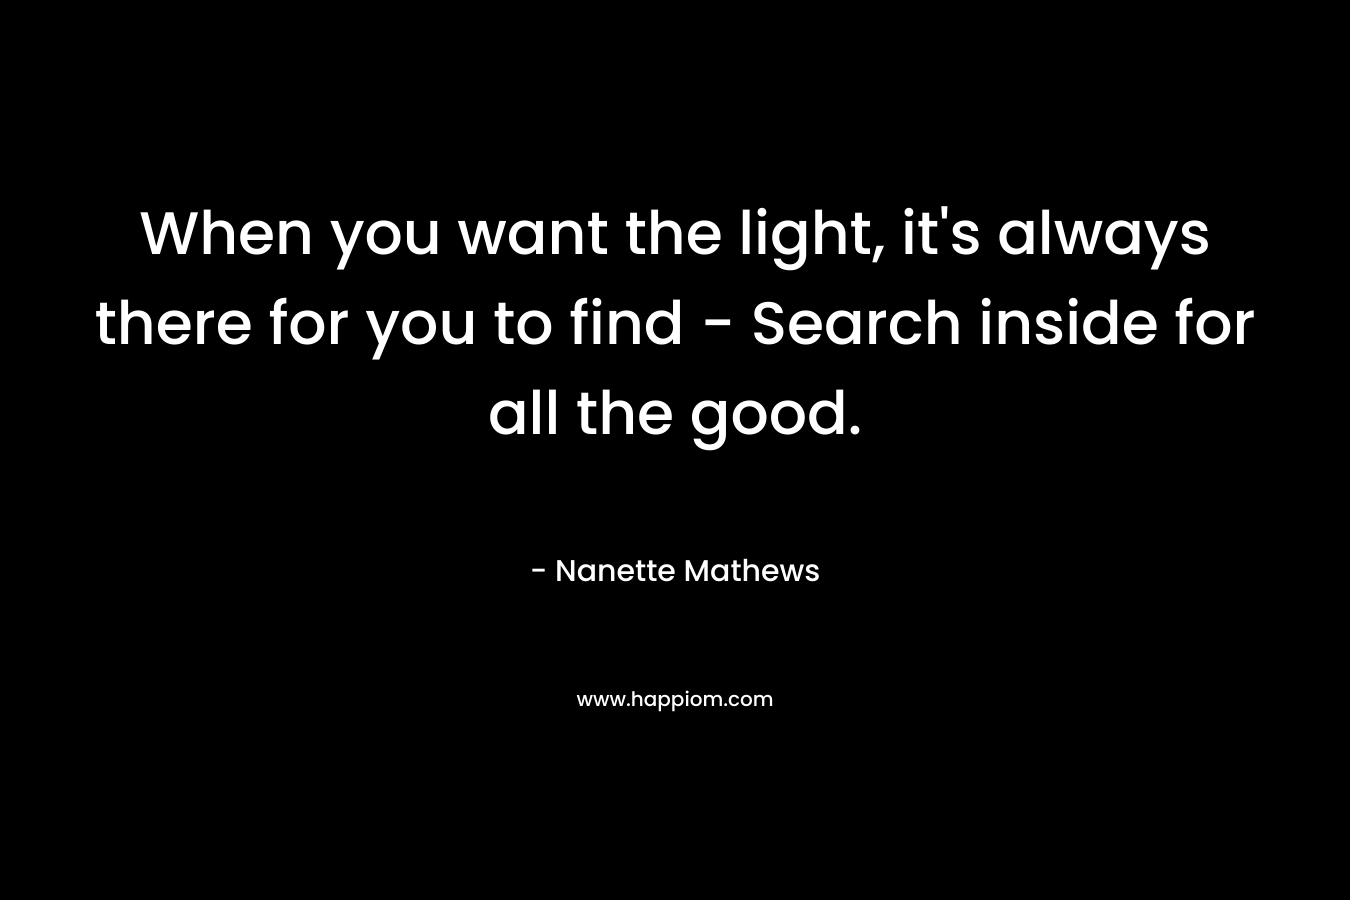 When you want the light, it's always there for you to find - Search inside for all the good.